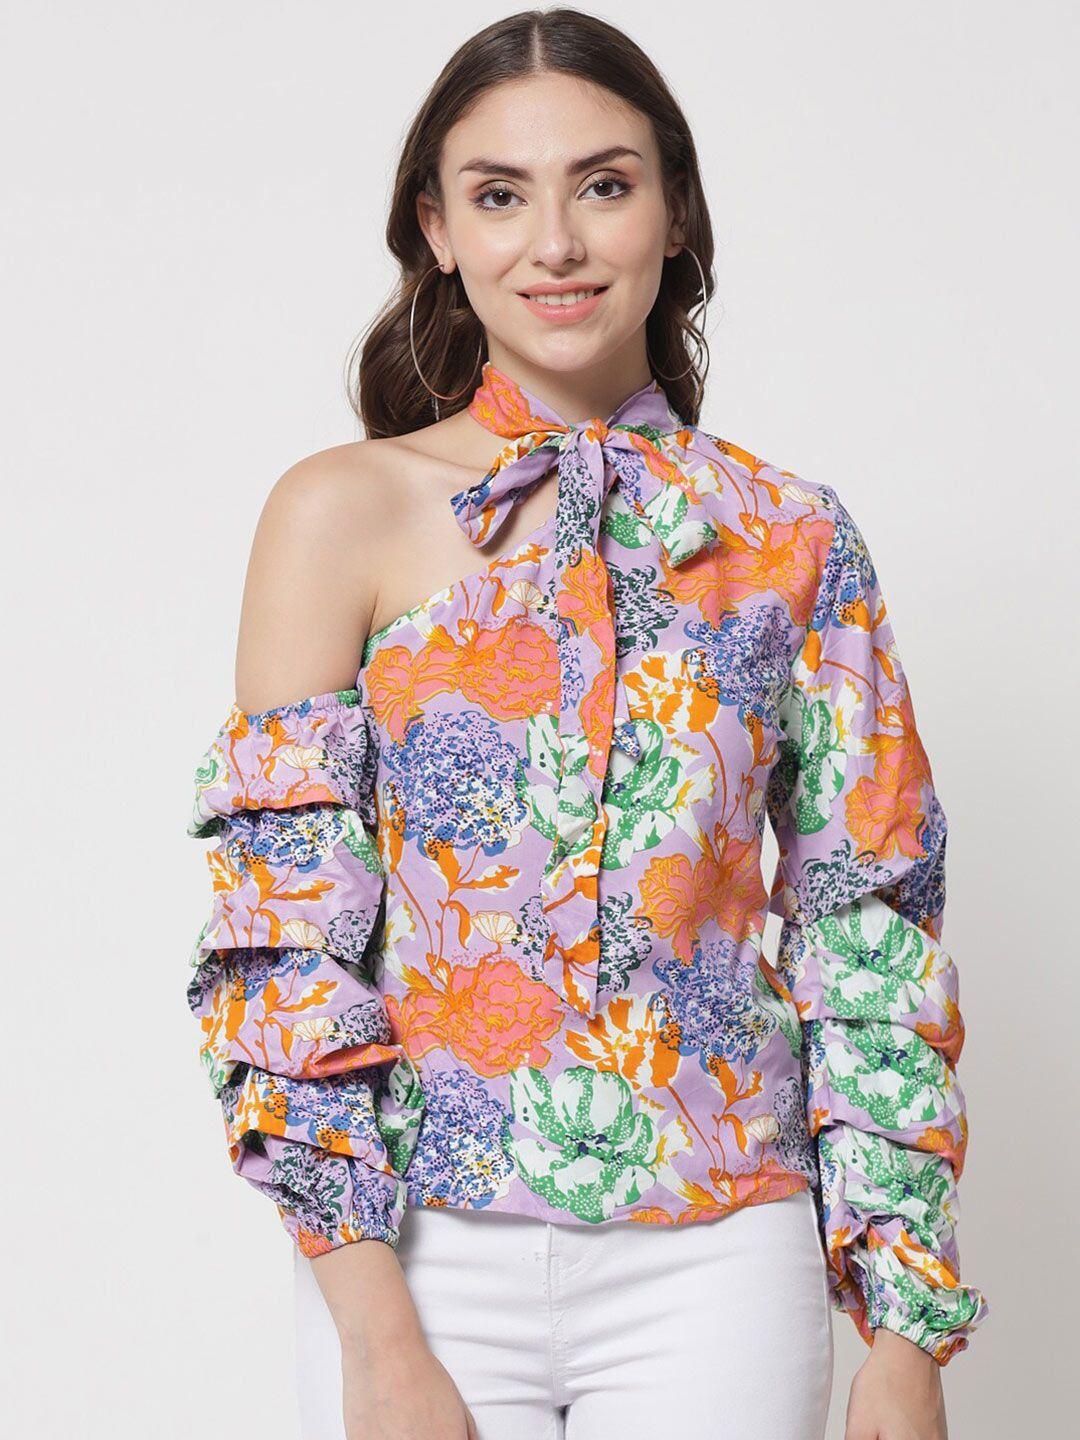 the dry state orange & green floral print tie-up neck top